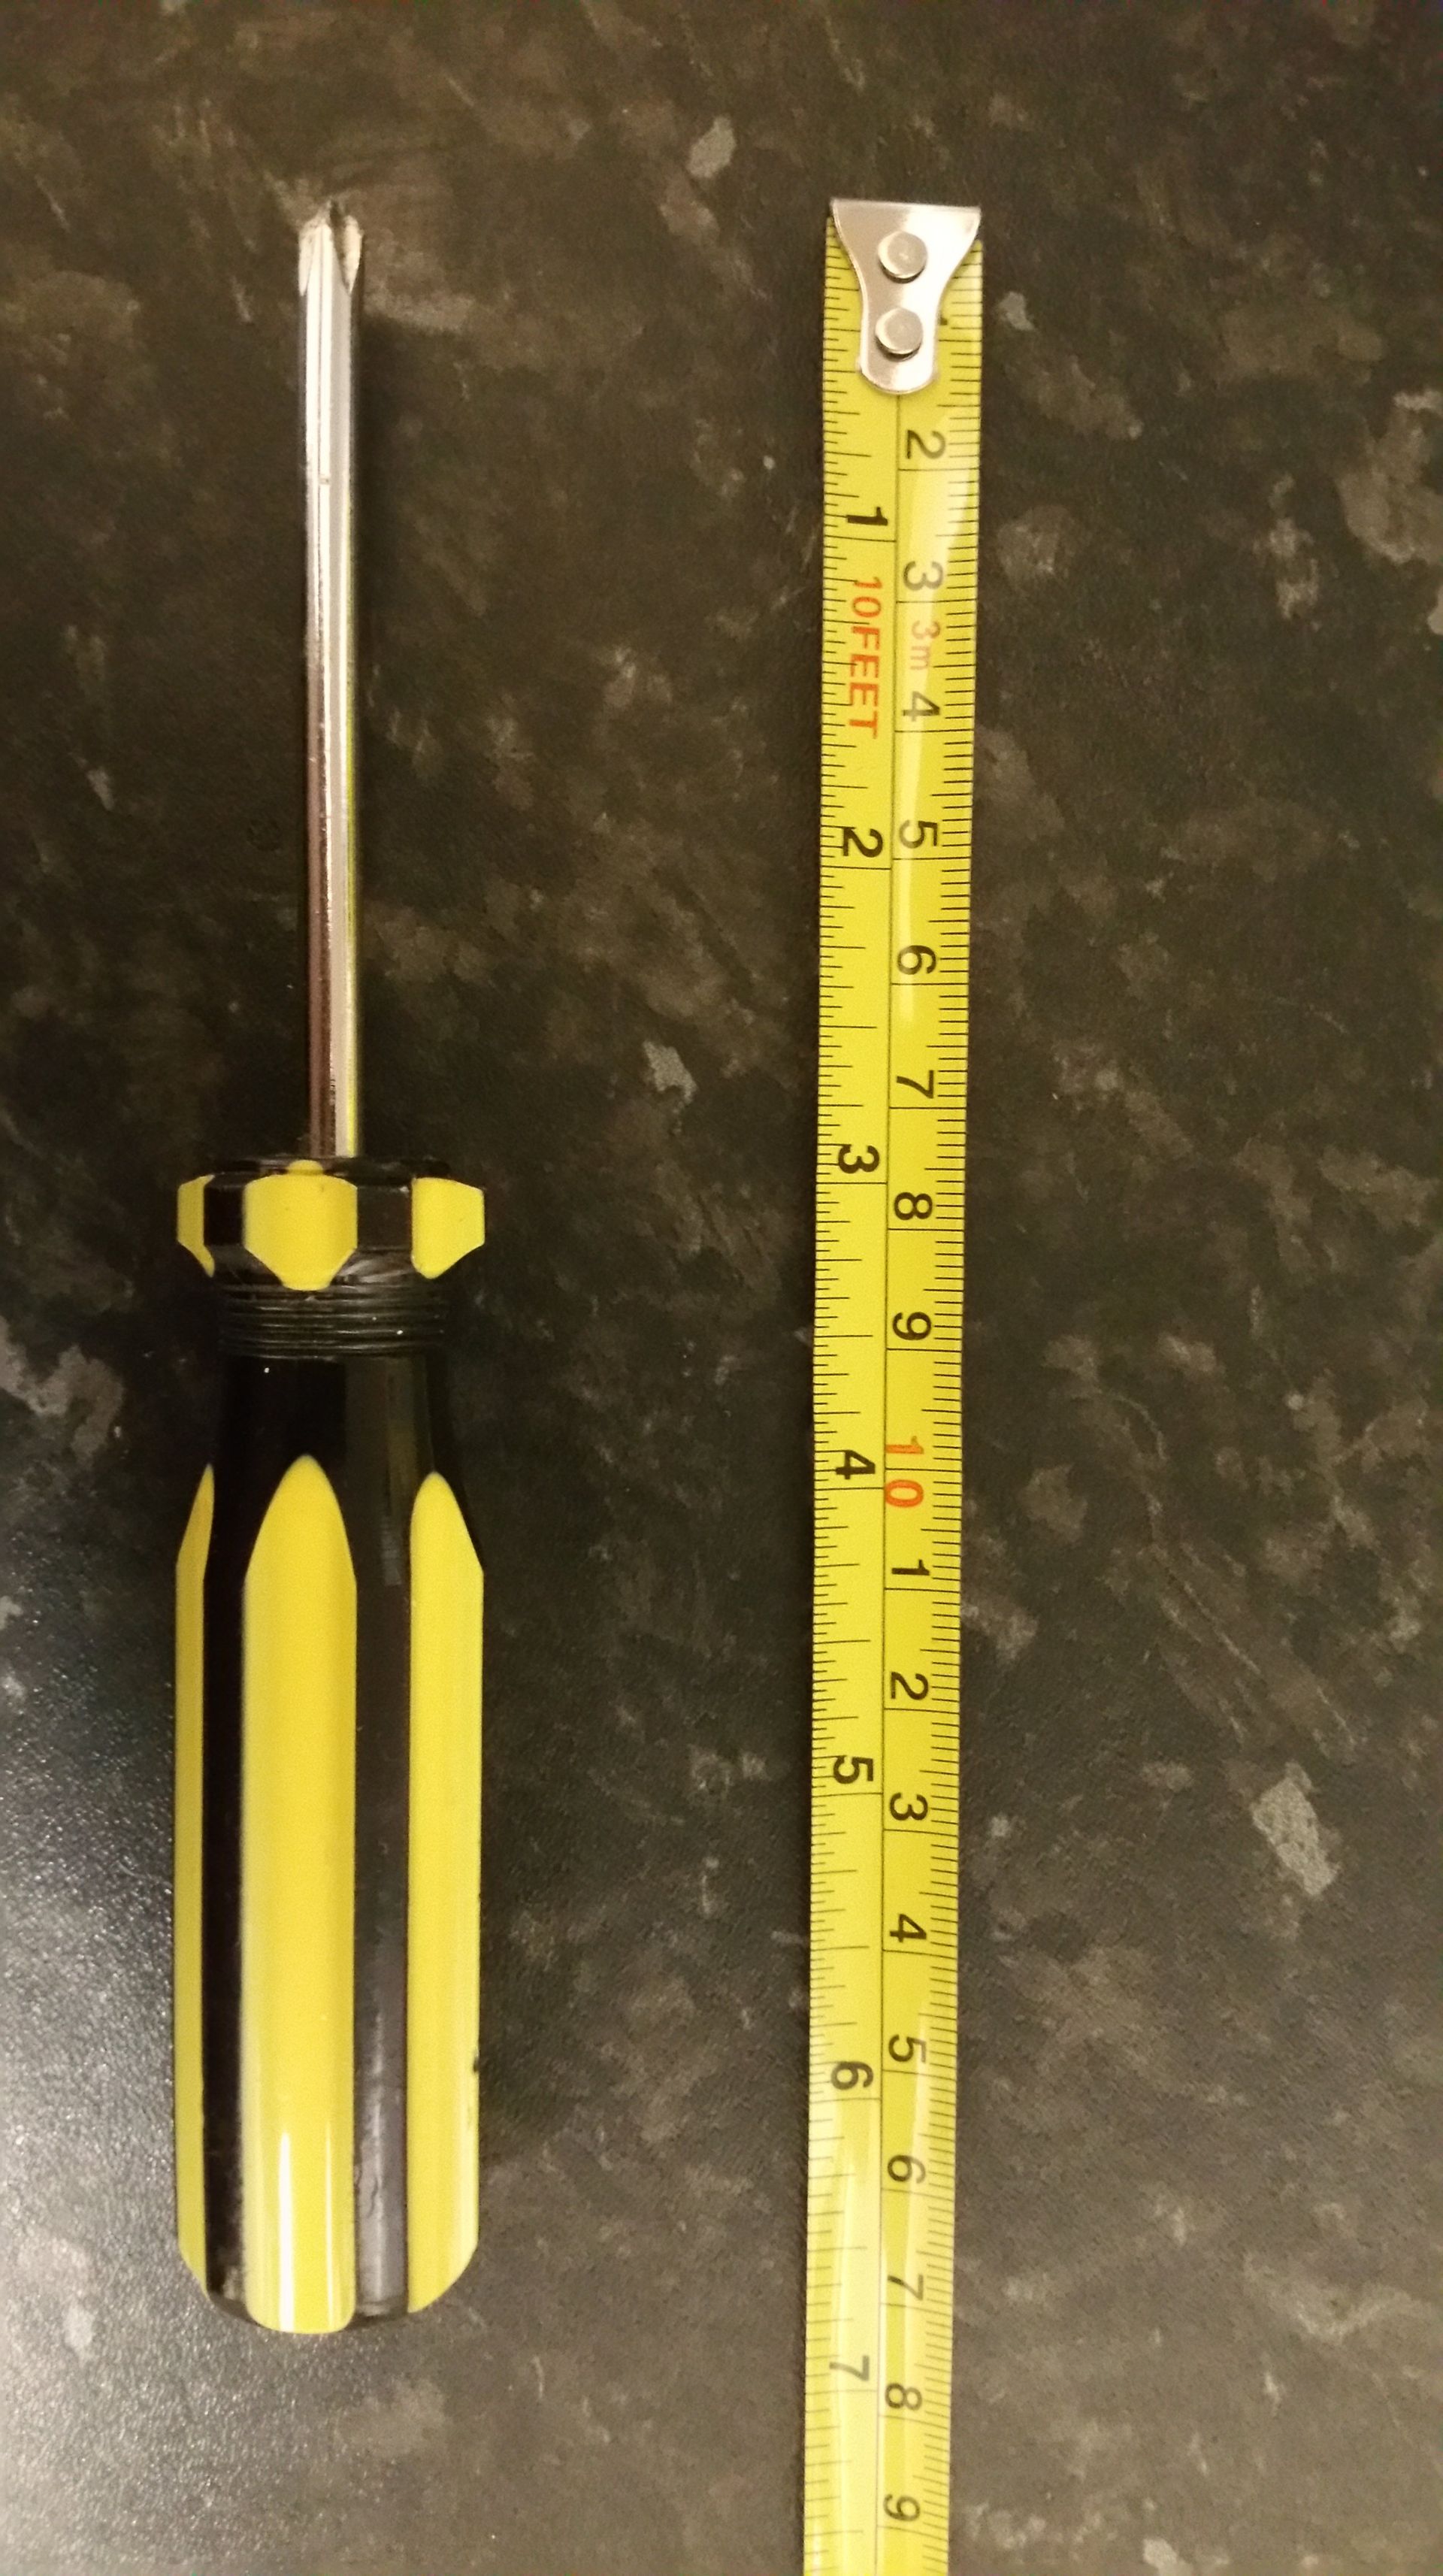 Are You Scared Of The Screwdriver And Tape Measure?